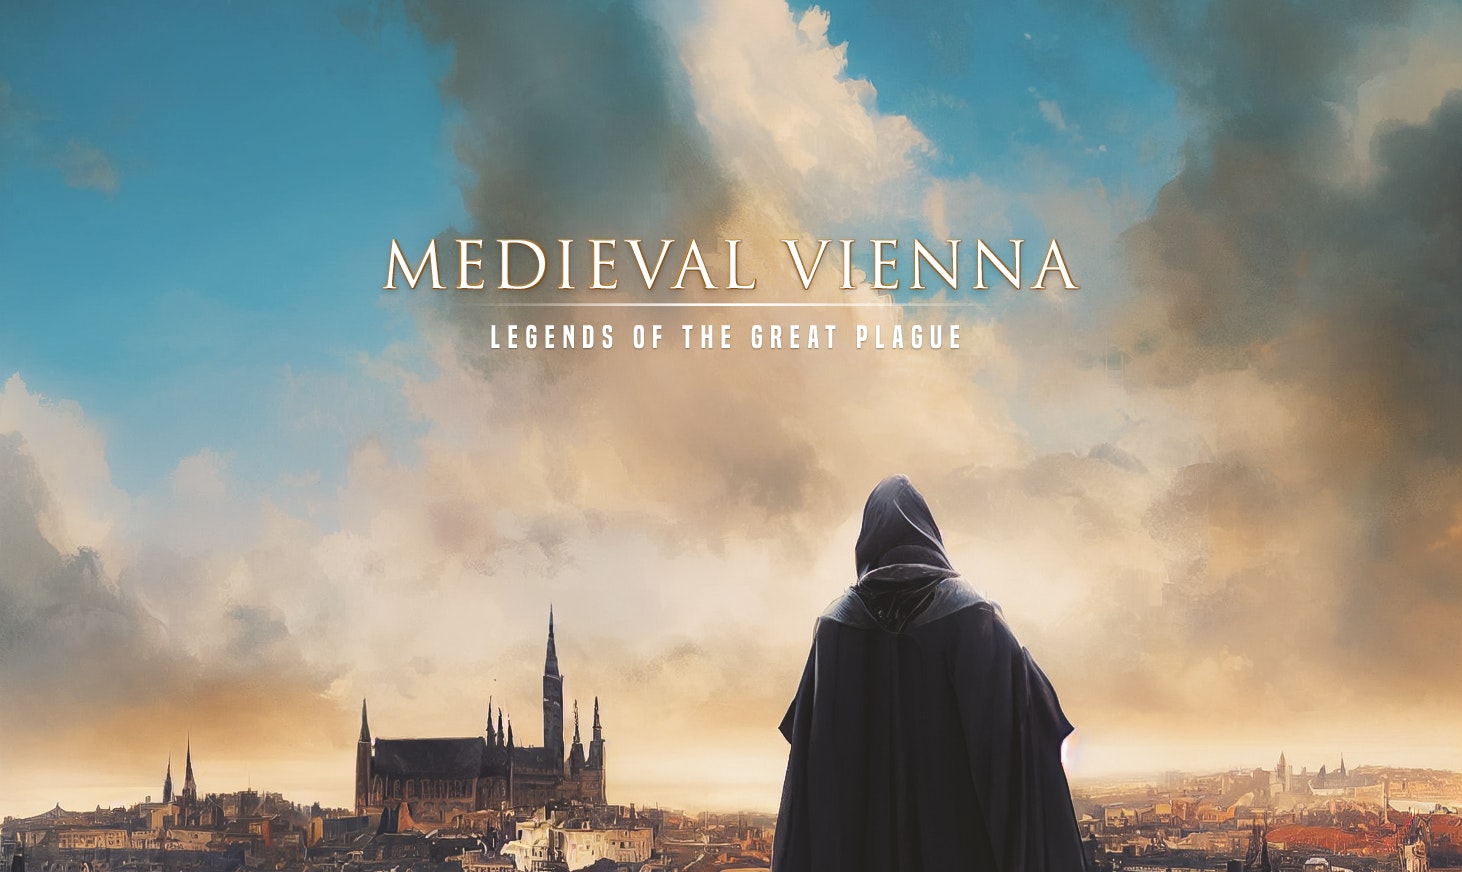 Medieval Vienna: Legends of the Great Plague